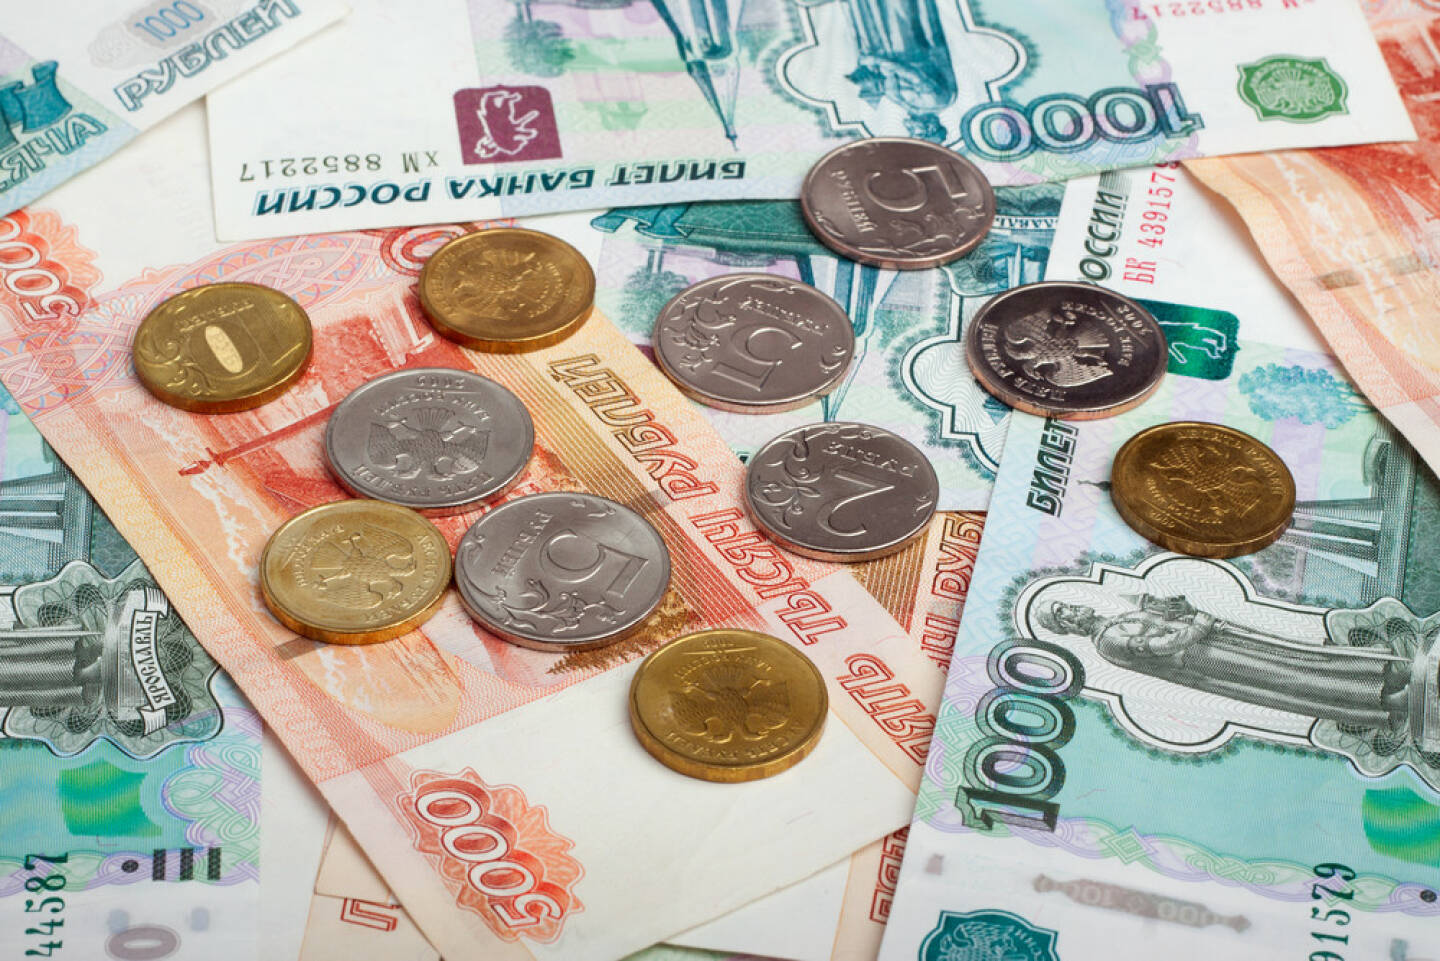 Rubel, Russland, Moskau http://www.shutterstock.com/de/pic-129396722/stock-photo-russian-currency-rouble-banknotes-and-coins.html (Bild: www.shutterstock.com)